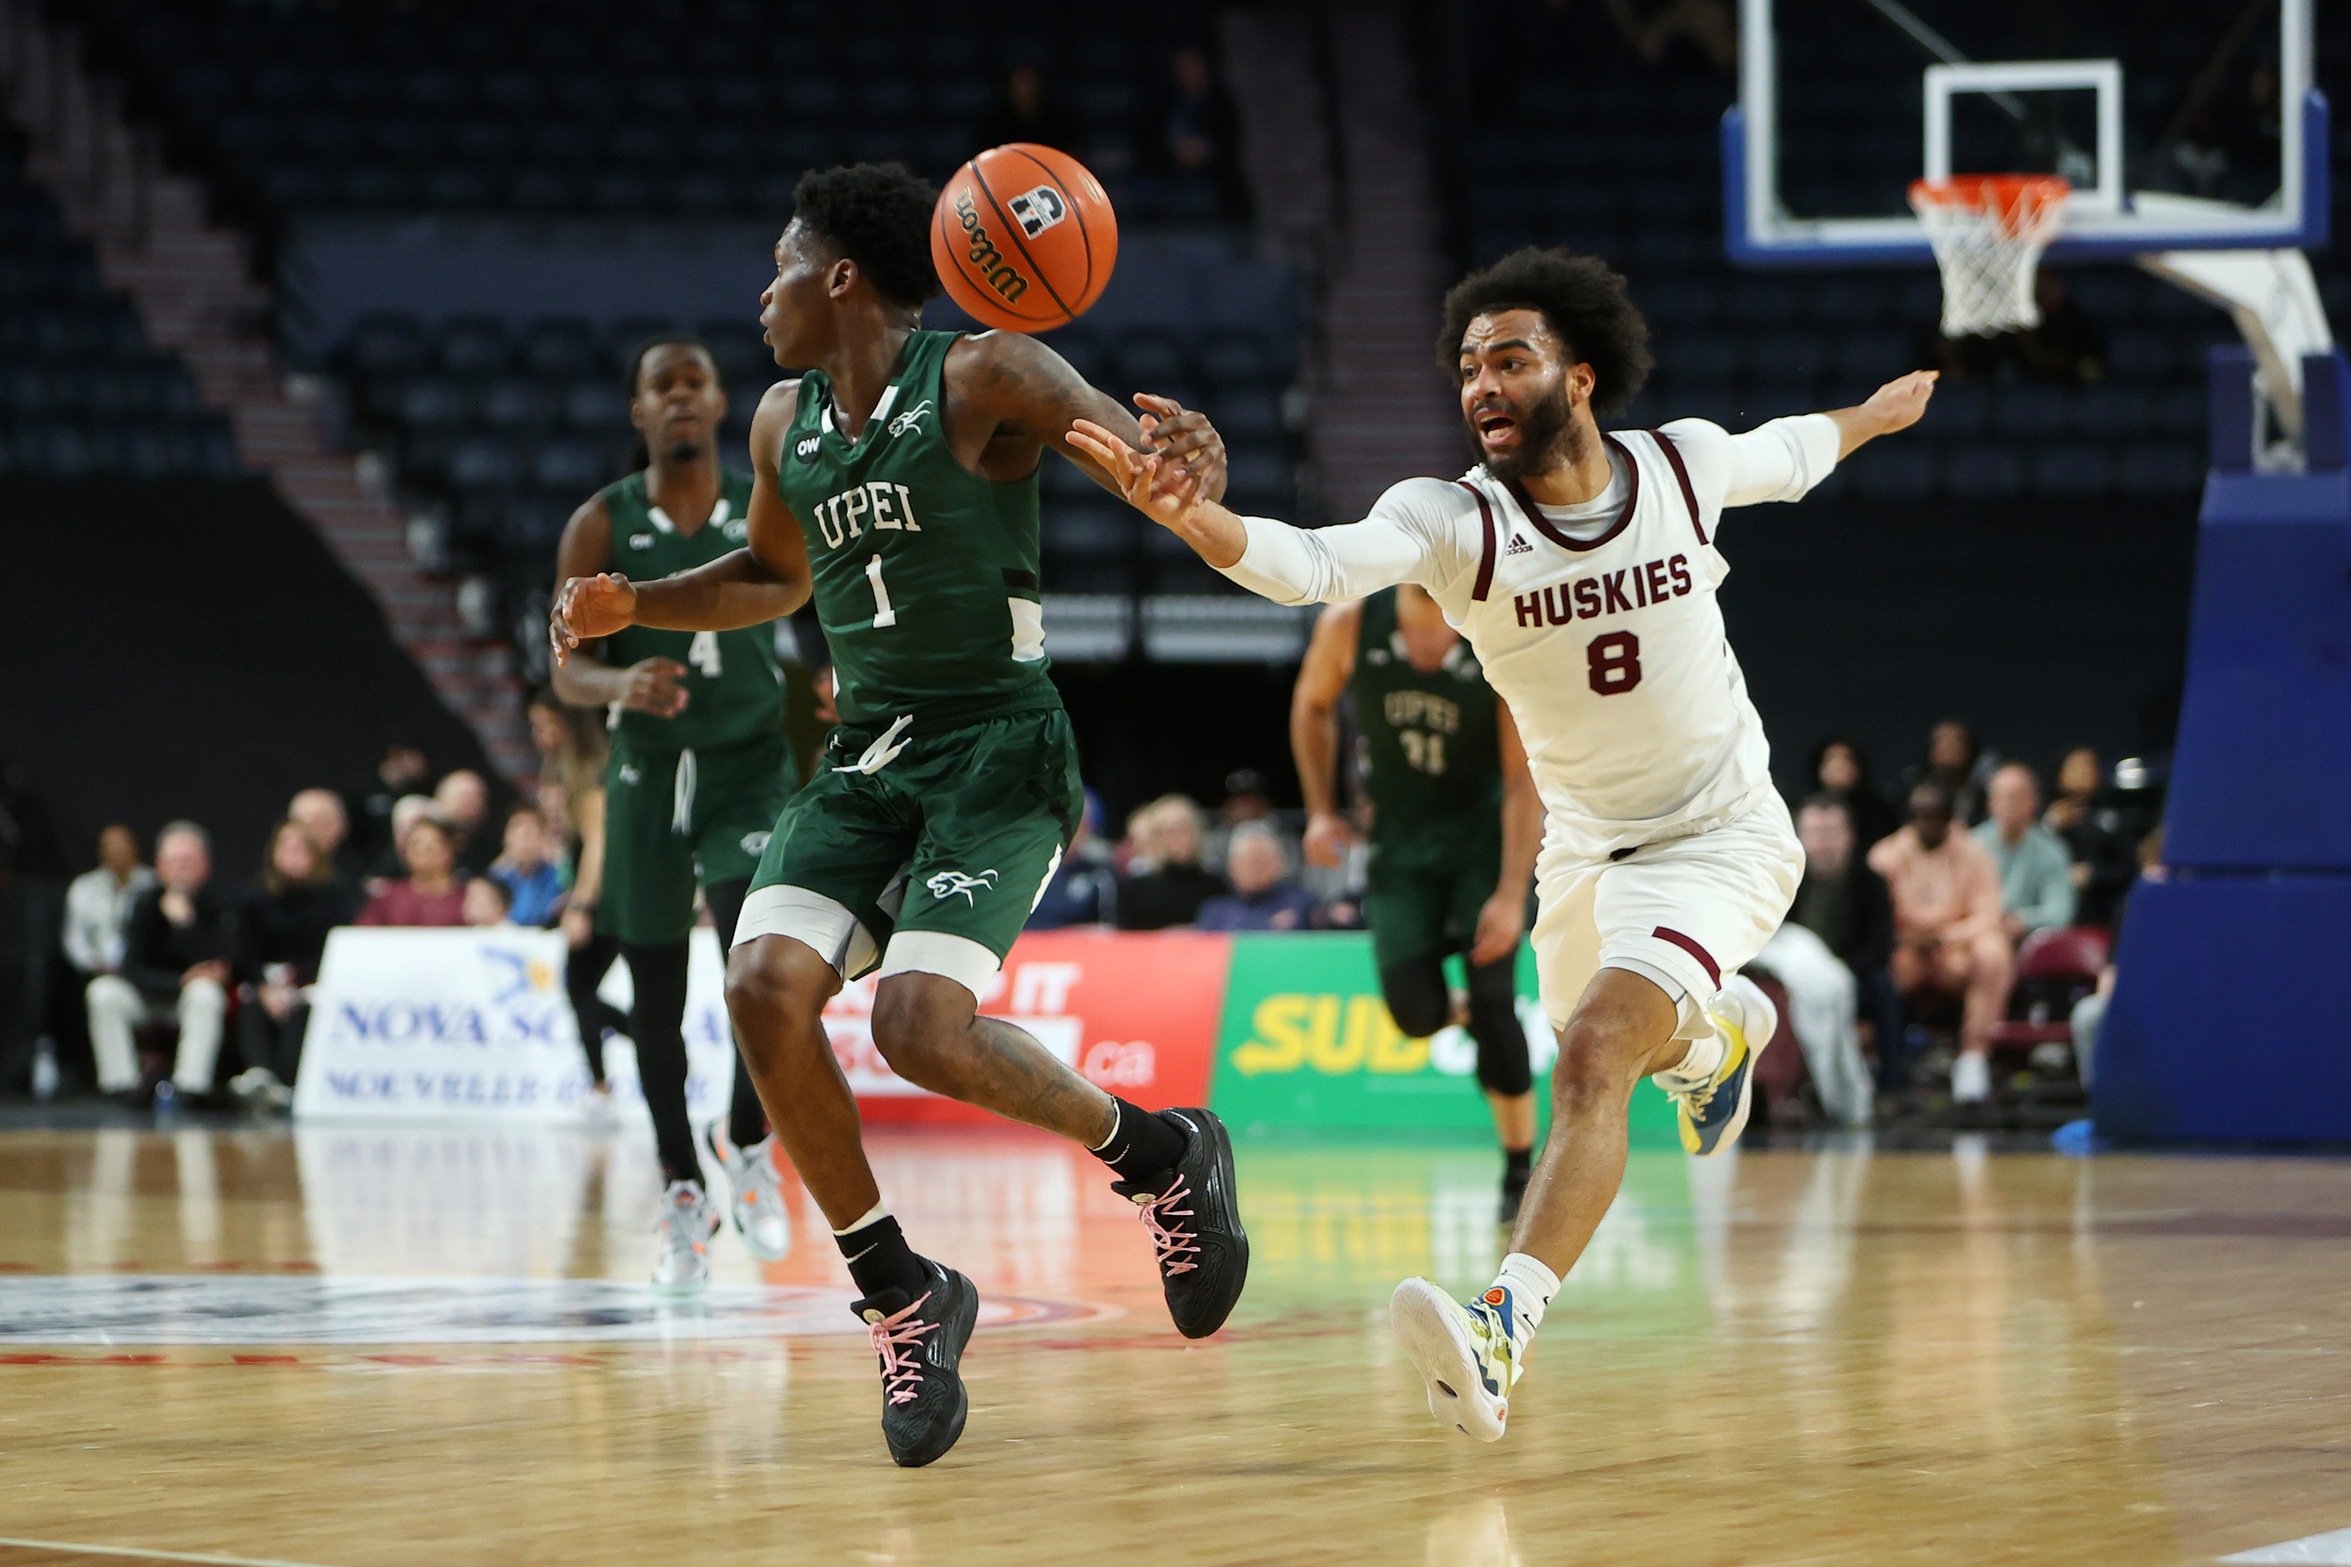 Huskies advance to AUS semifinal with 68-64 win over Panthers